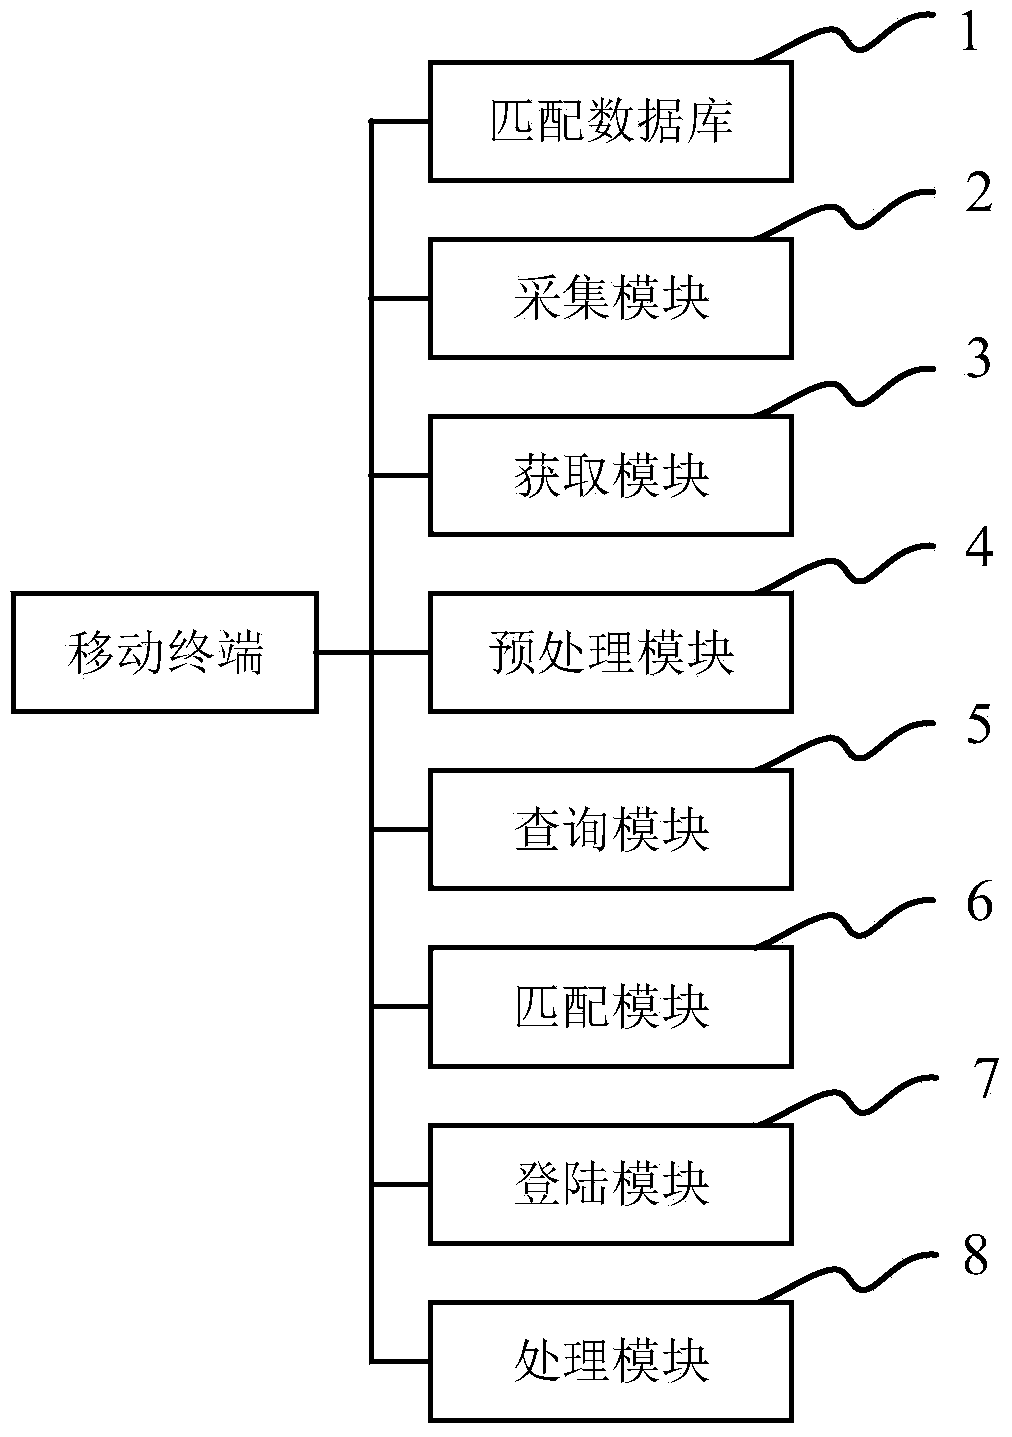 Mobile terminal and mobile application login method